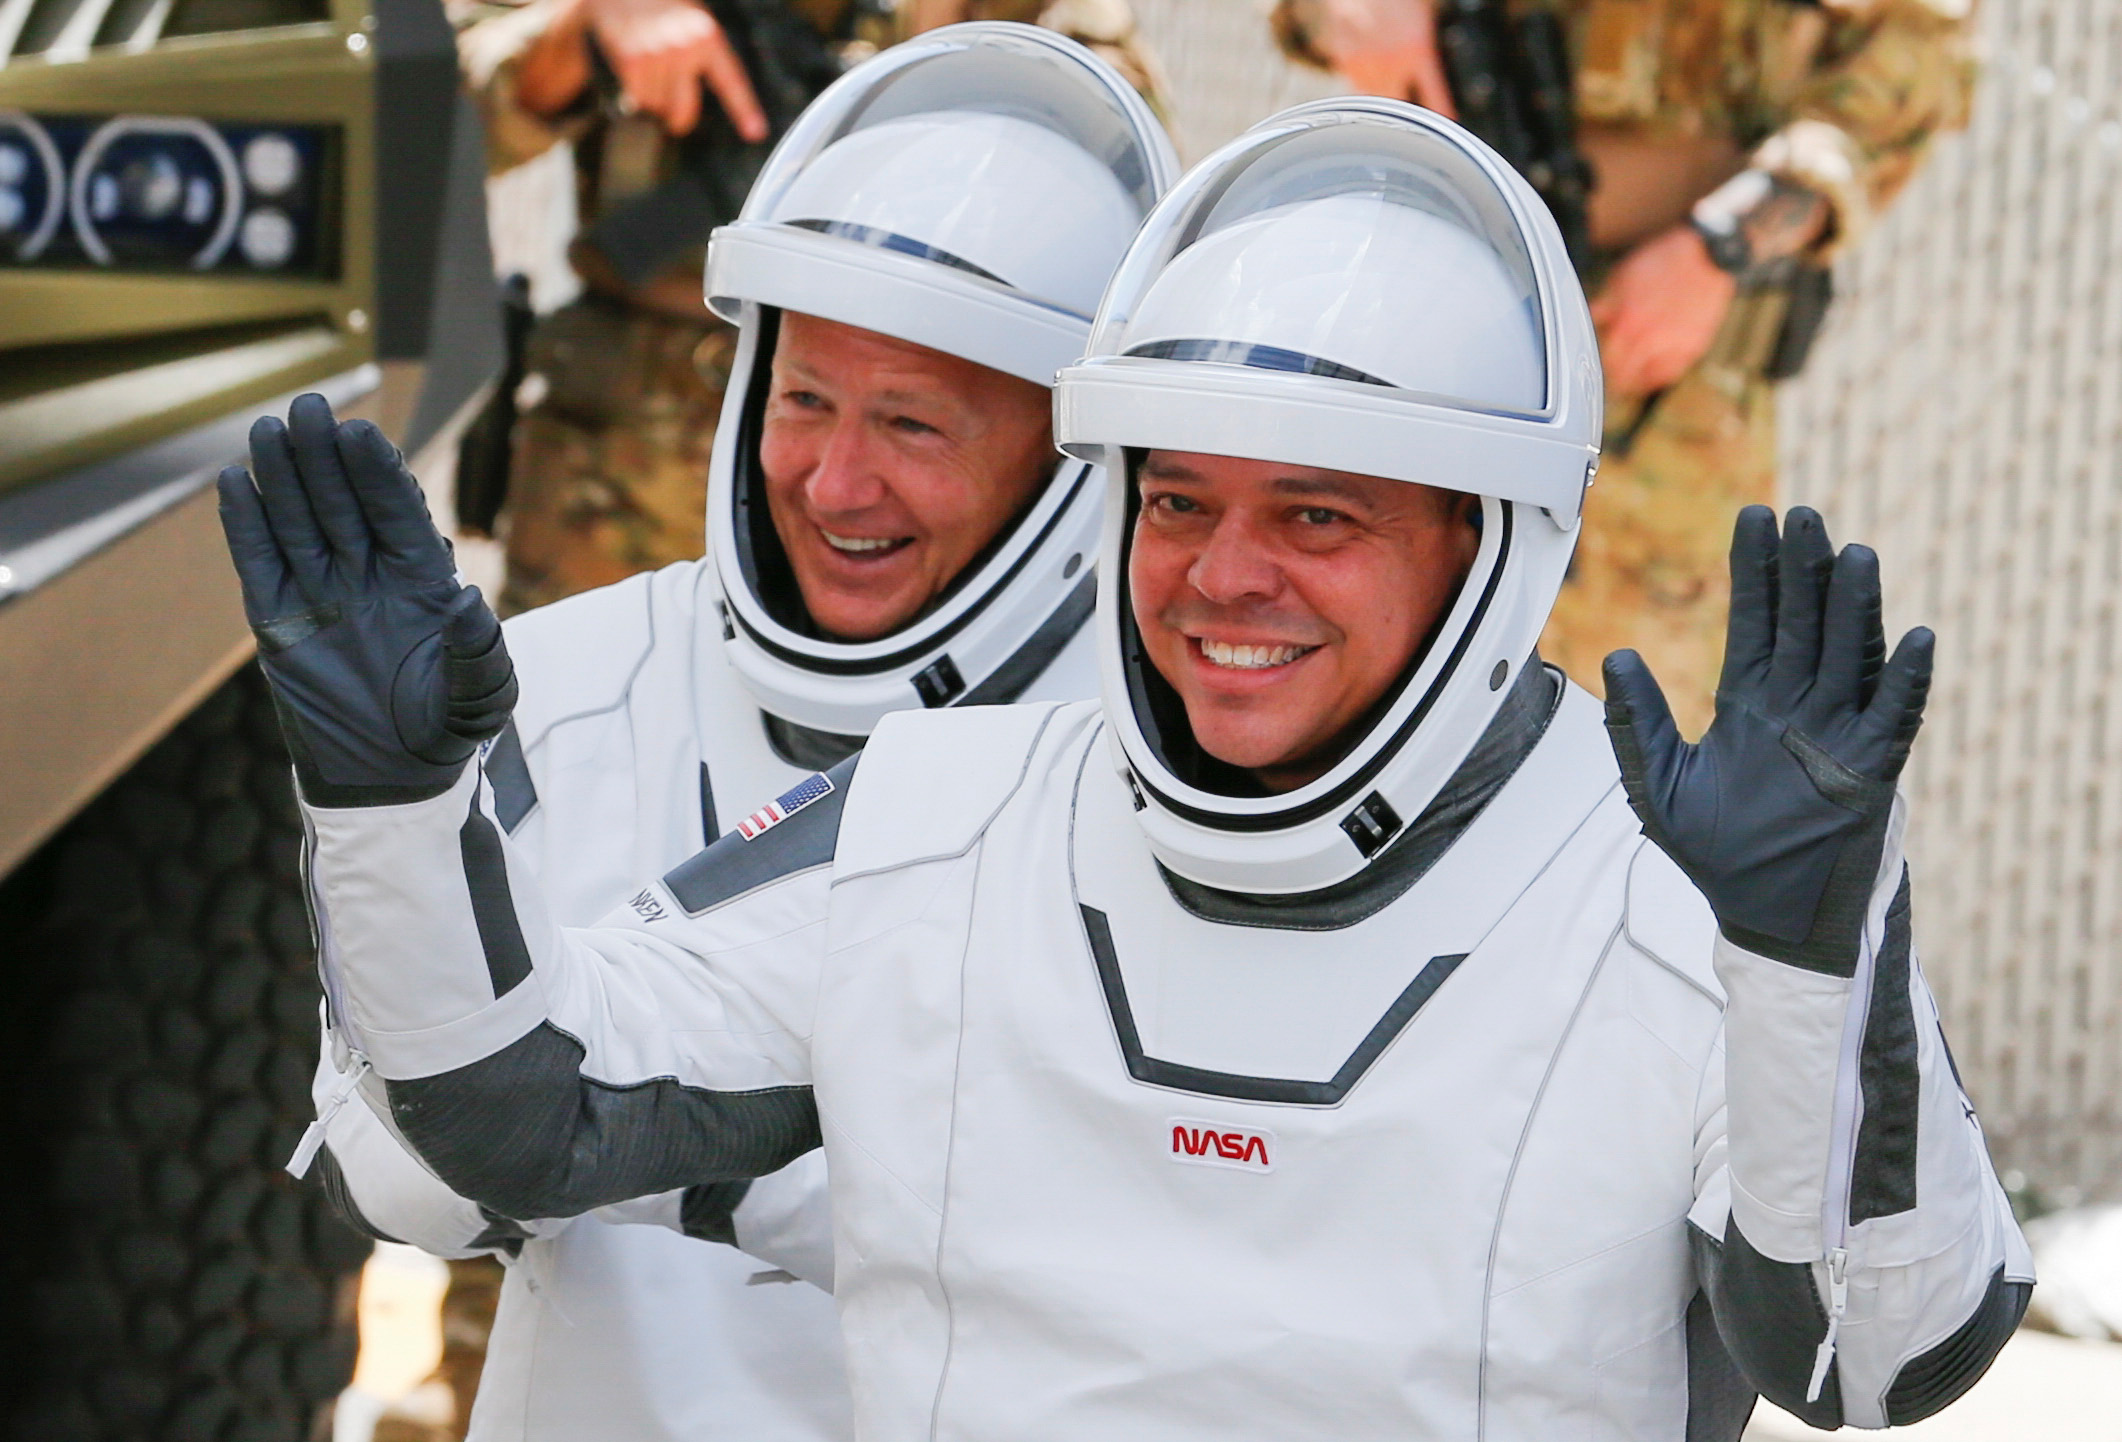 PHOTO: NASA astronauts Douglas Hurley and Robert Behnken head to launch pad 39 to board a SpaceX Falcon 9 rocket for a second launch attempt to the International Space Station, at Cape Canaveral, Fla., May 30, 2020.